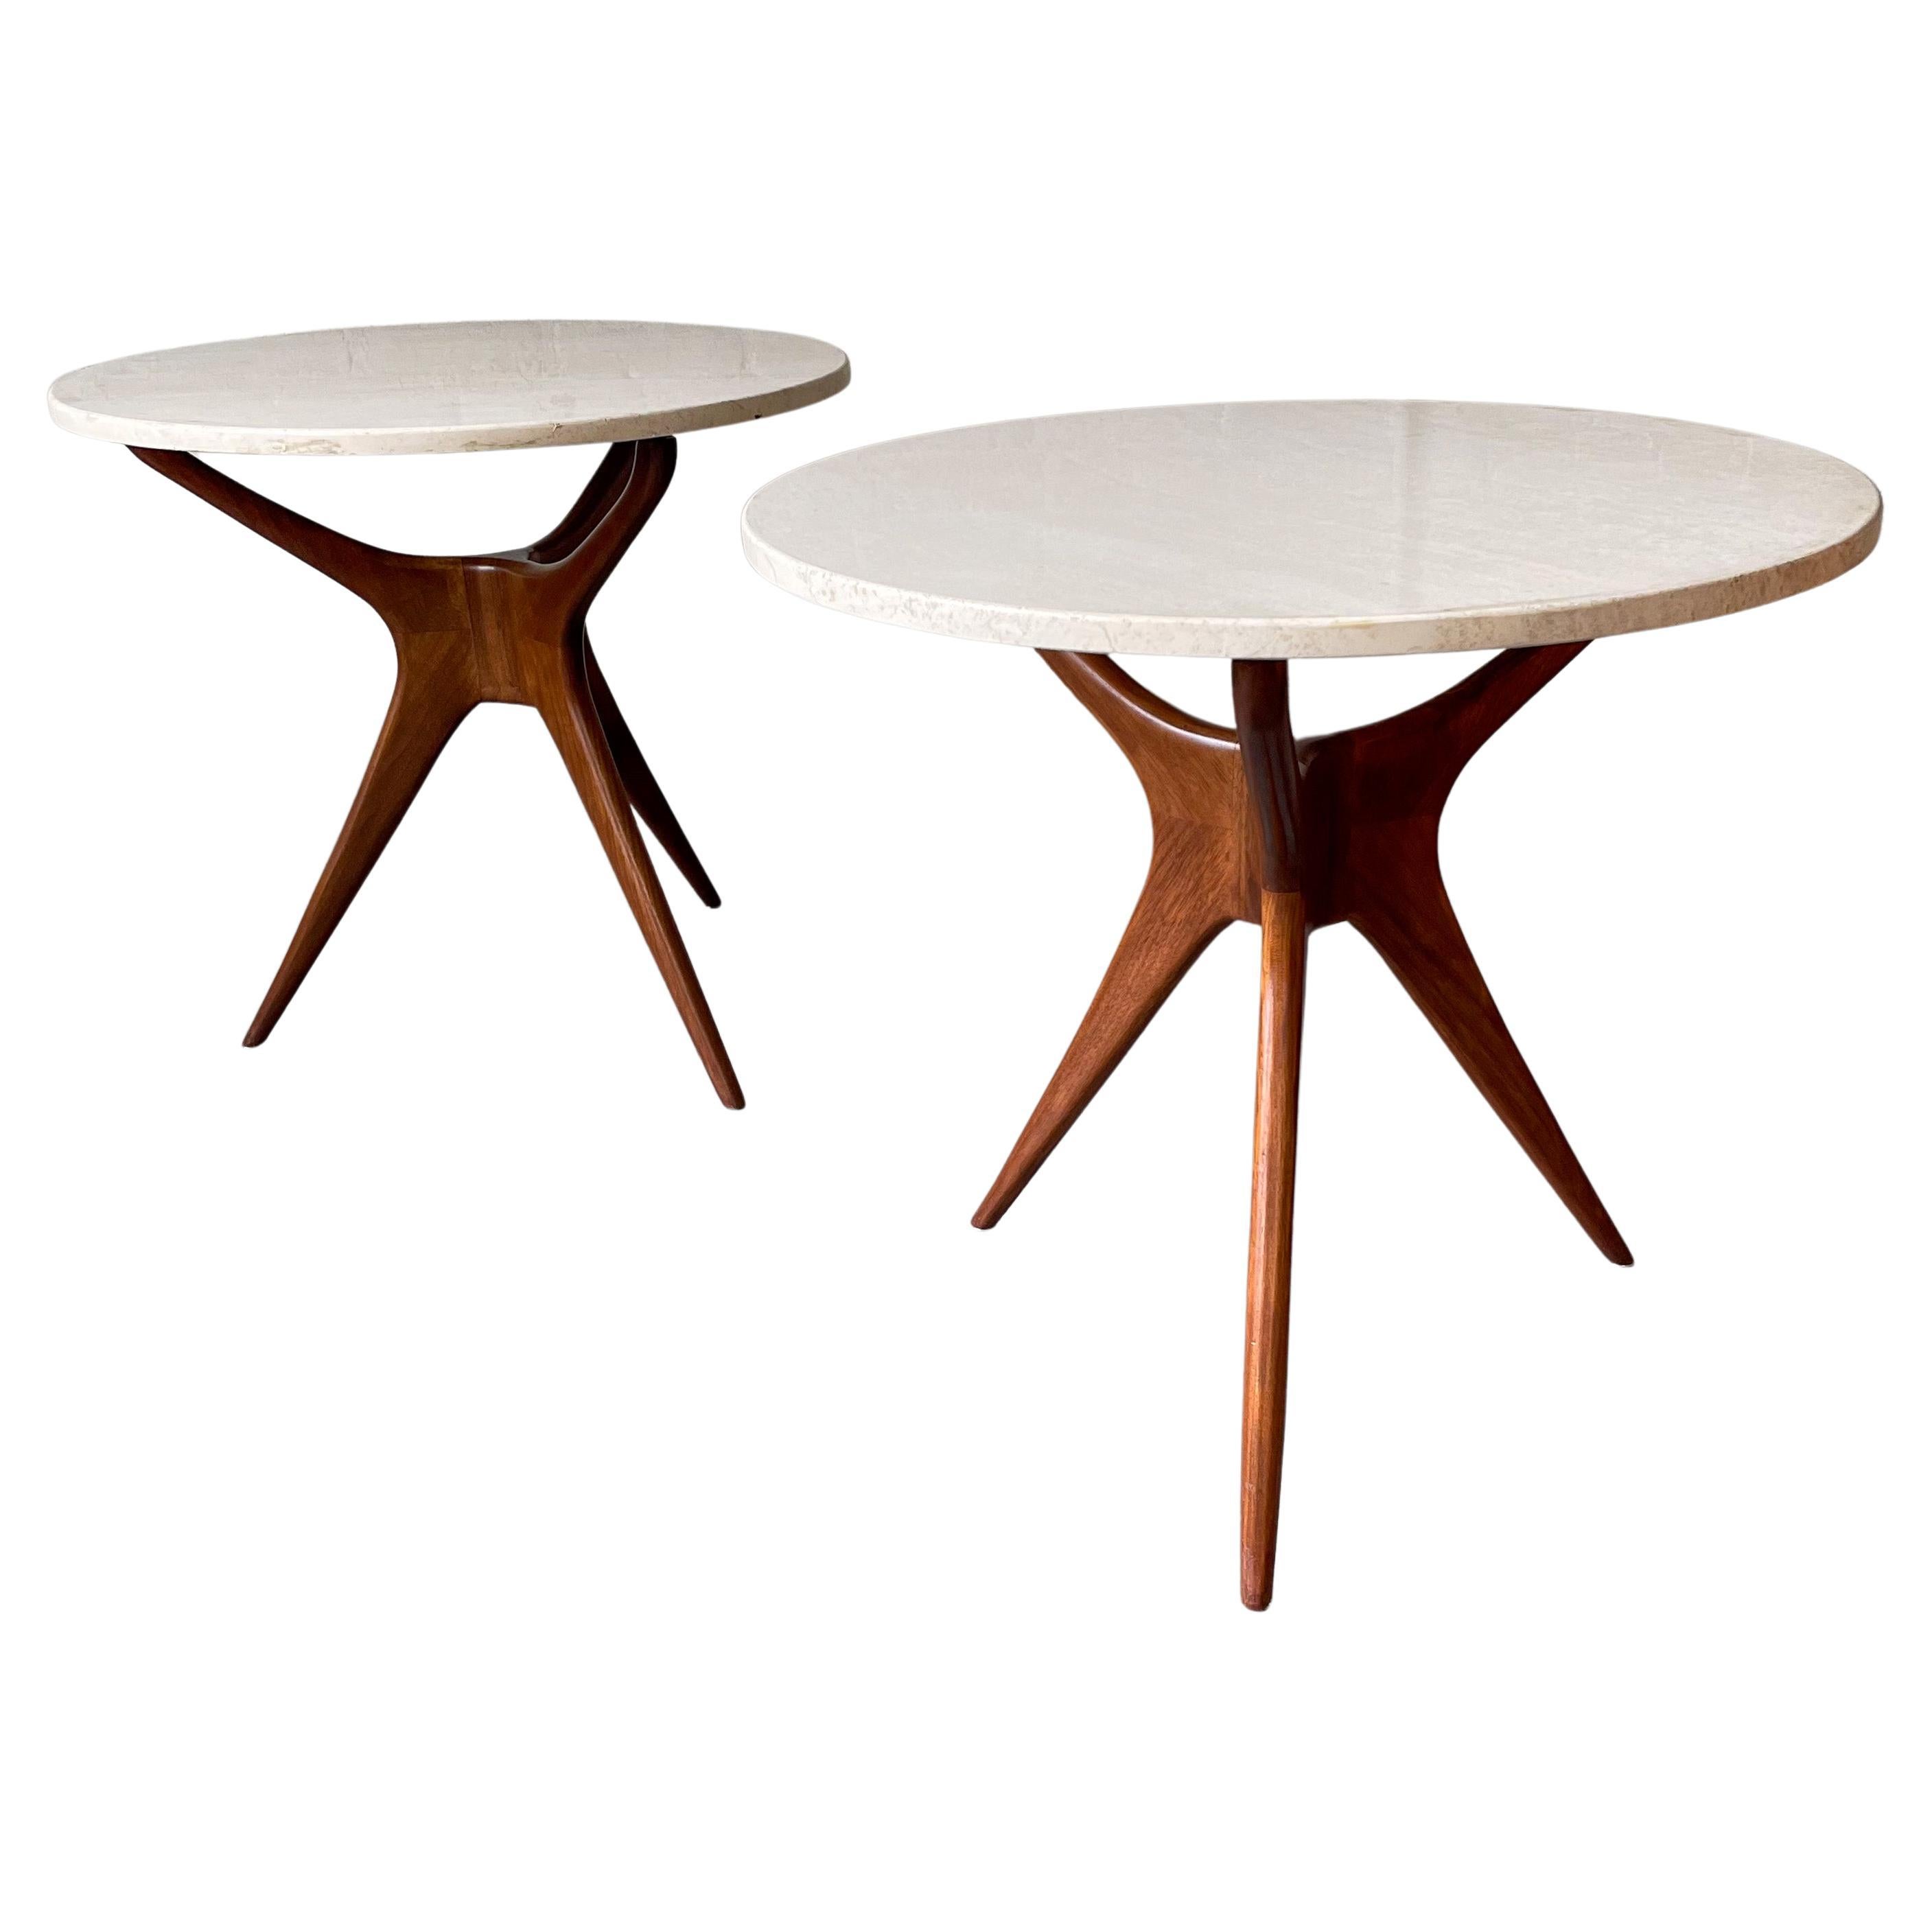 Pair of Round Trisymmetric Side Tables After Vladimir Kagan For Sale